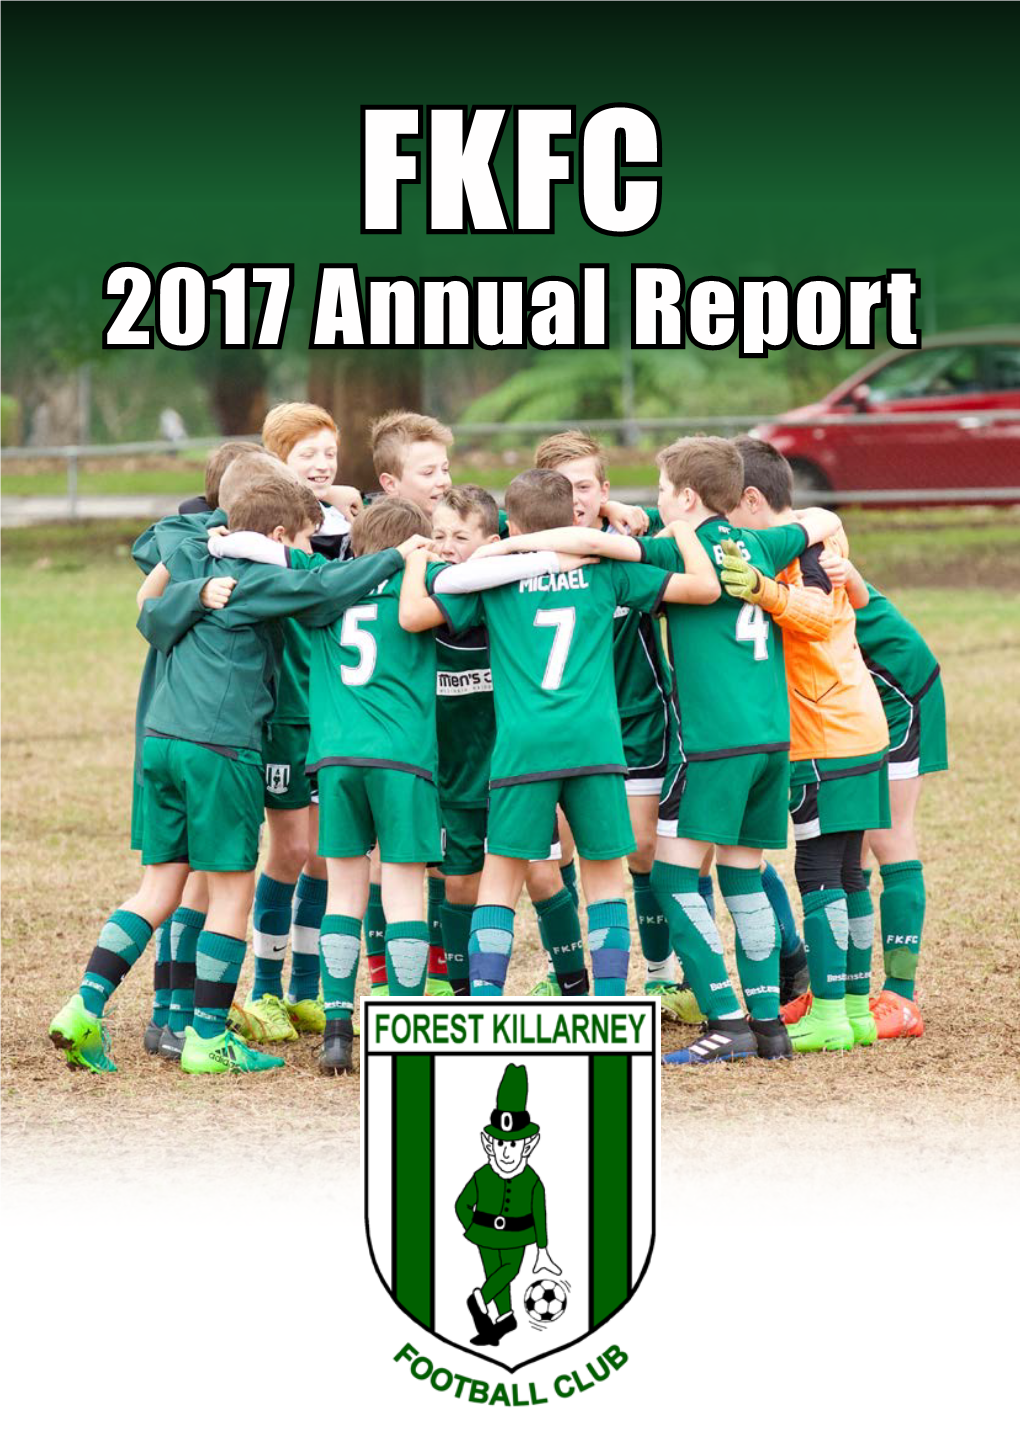 2017 Annual Report Table of Contents